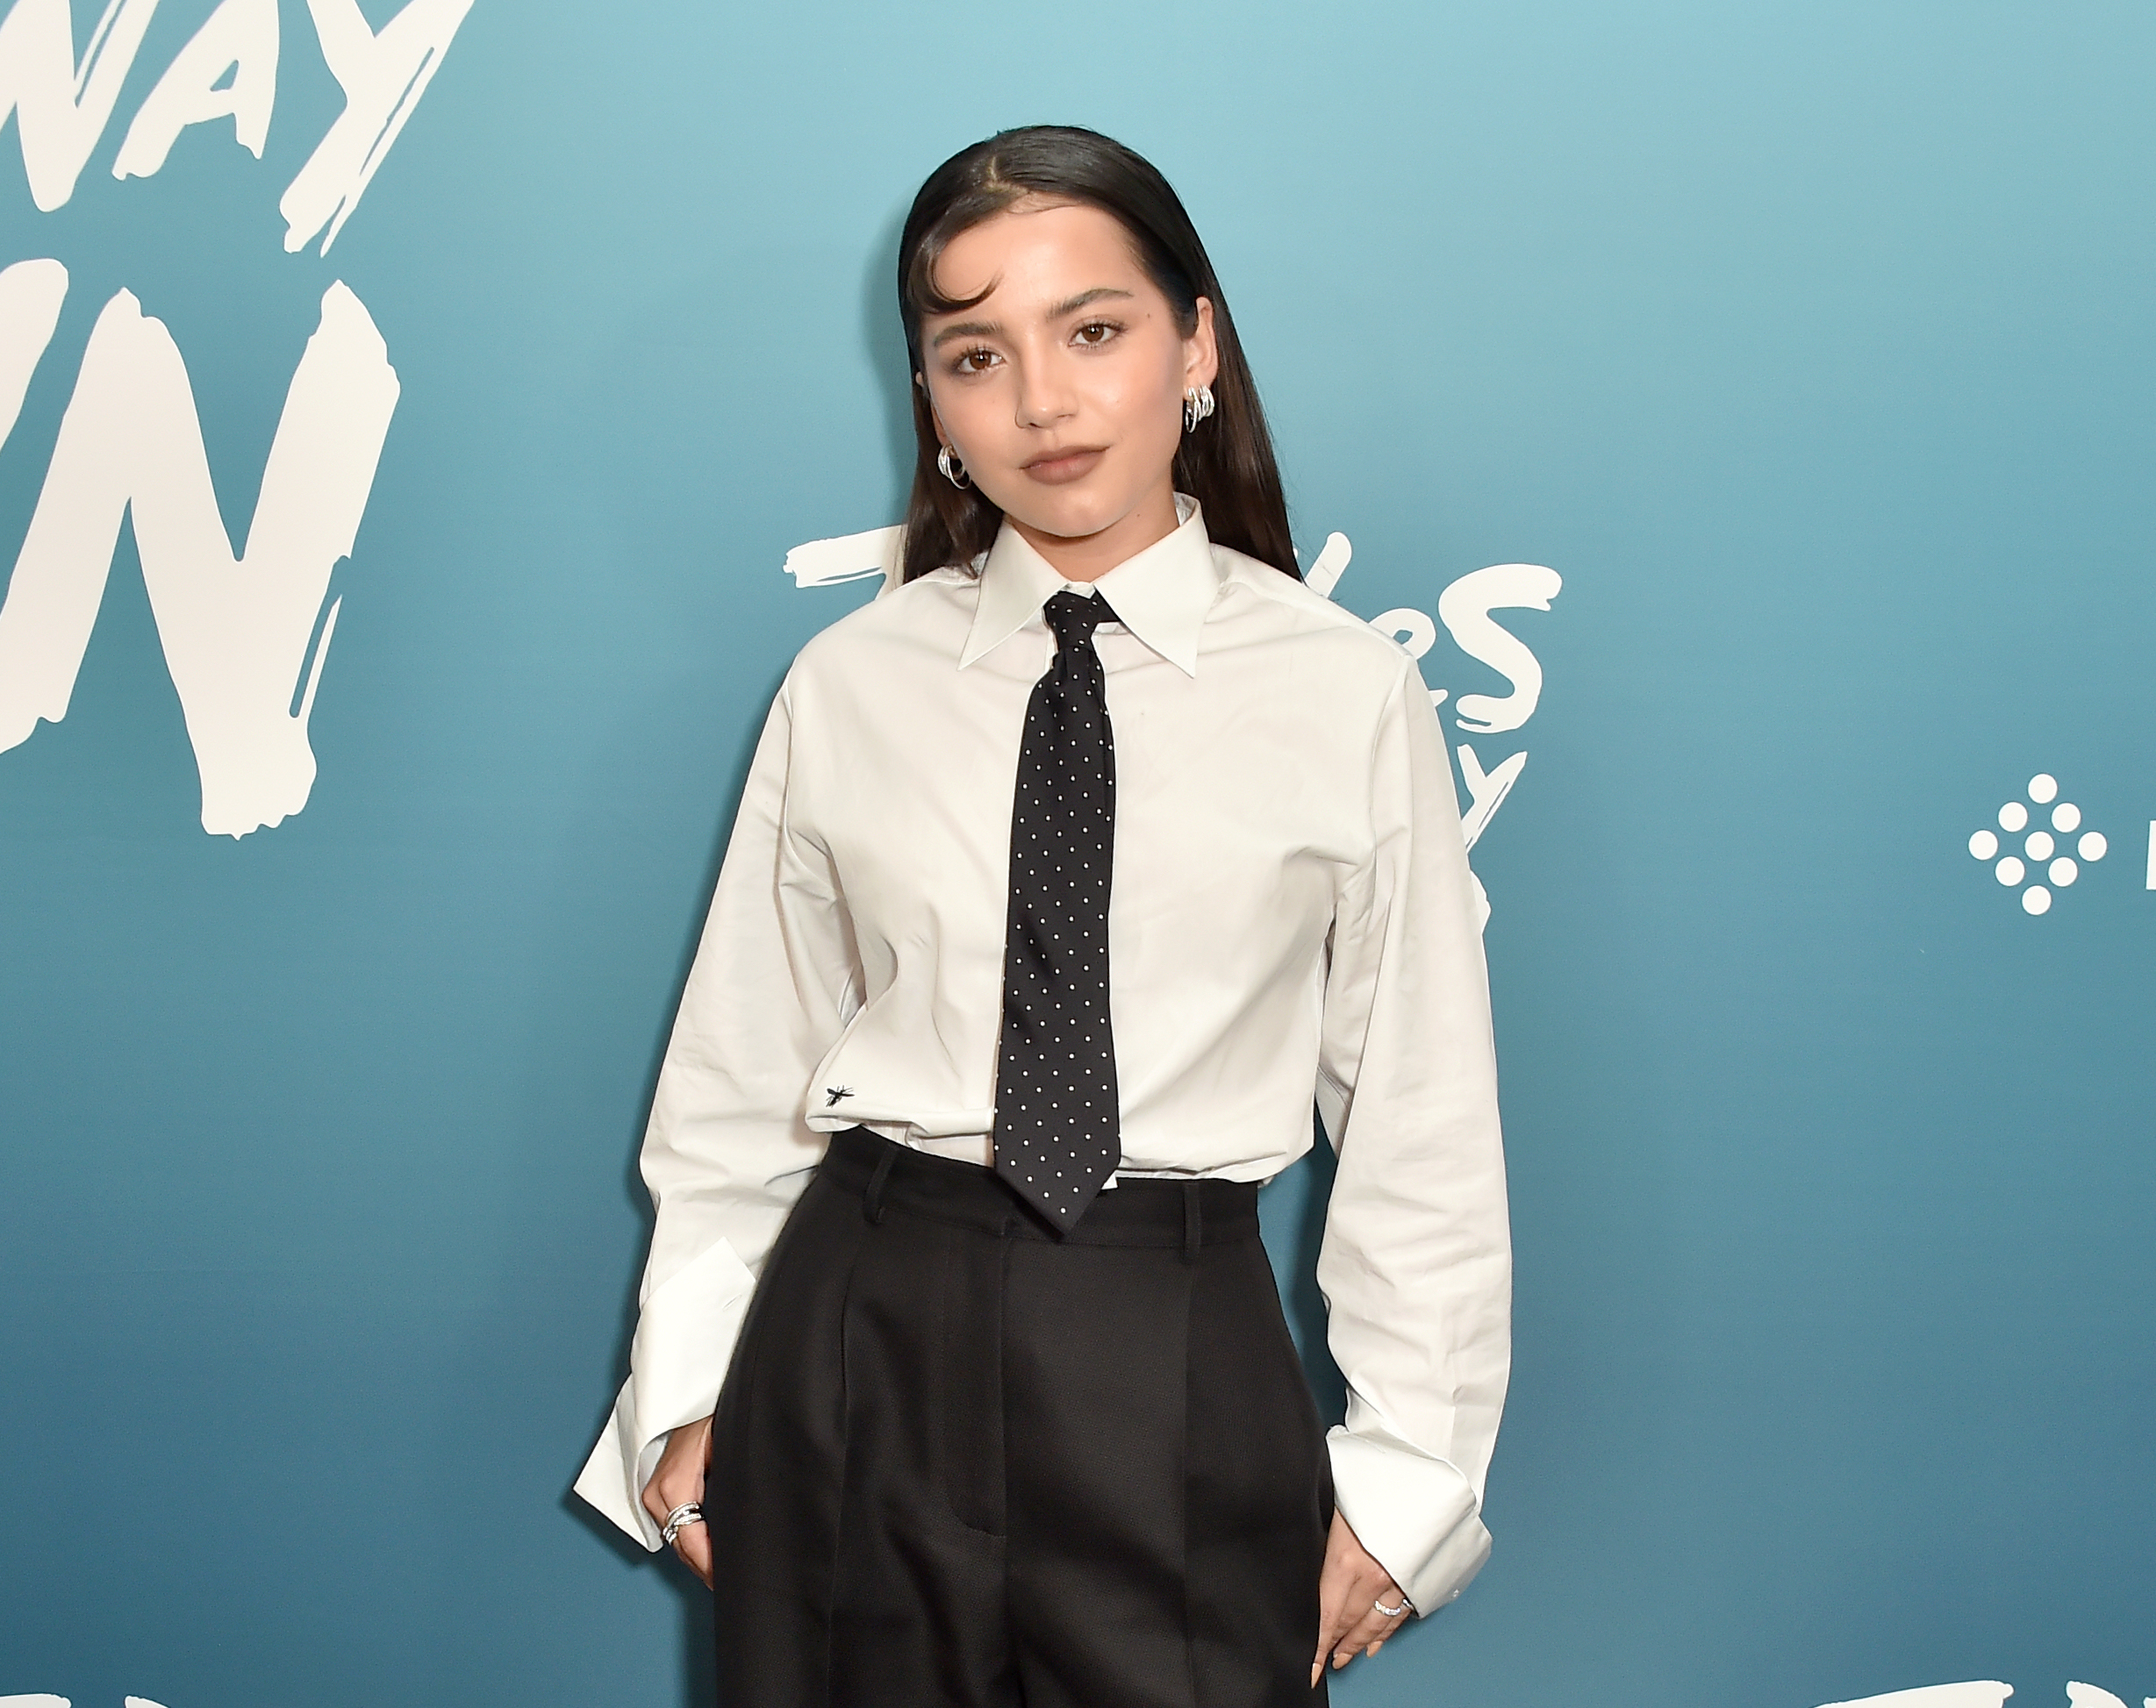 Isabela Merced’s Star Power Shines Bright in Dior at “Turtles All the Way Down” Premiere